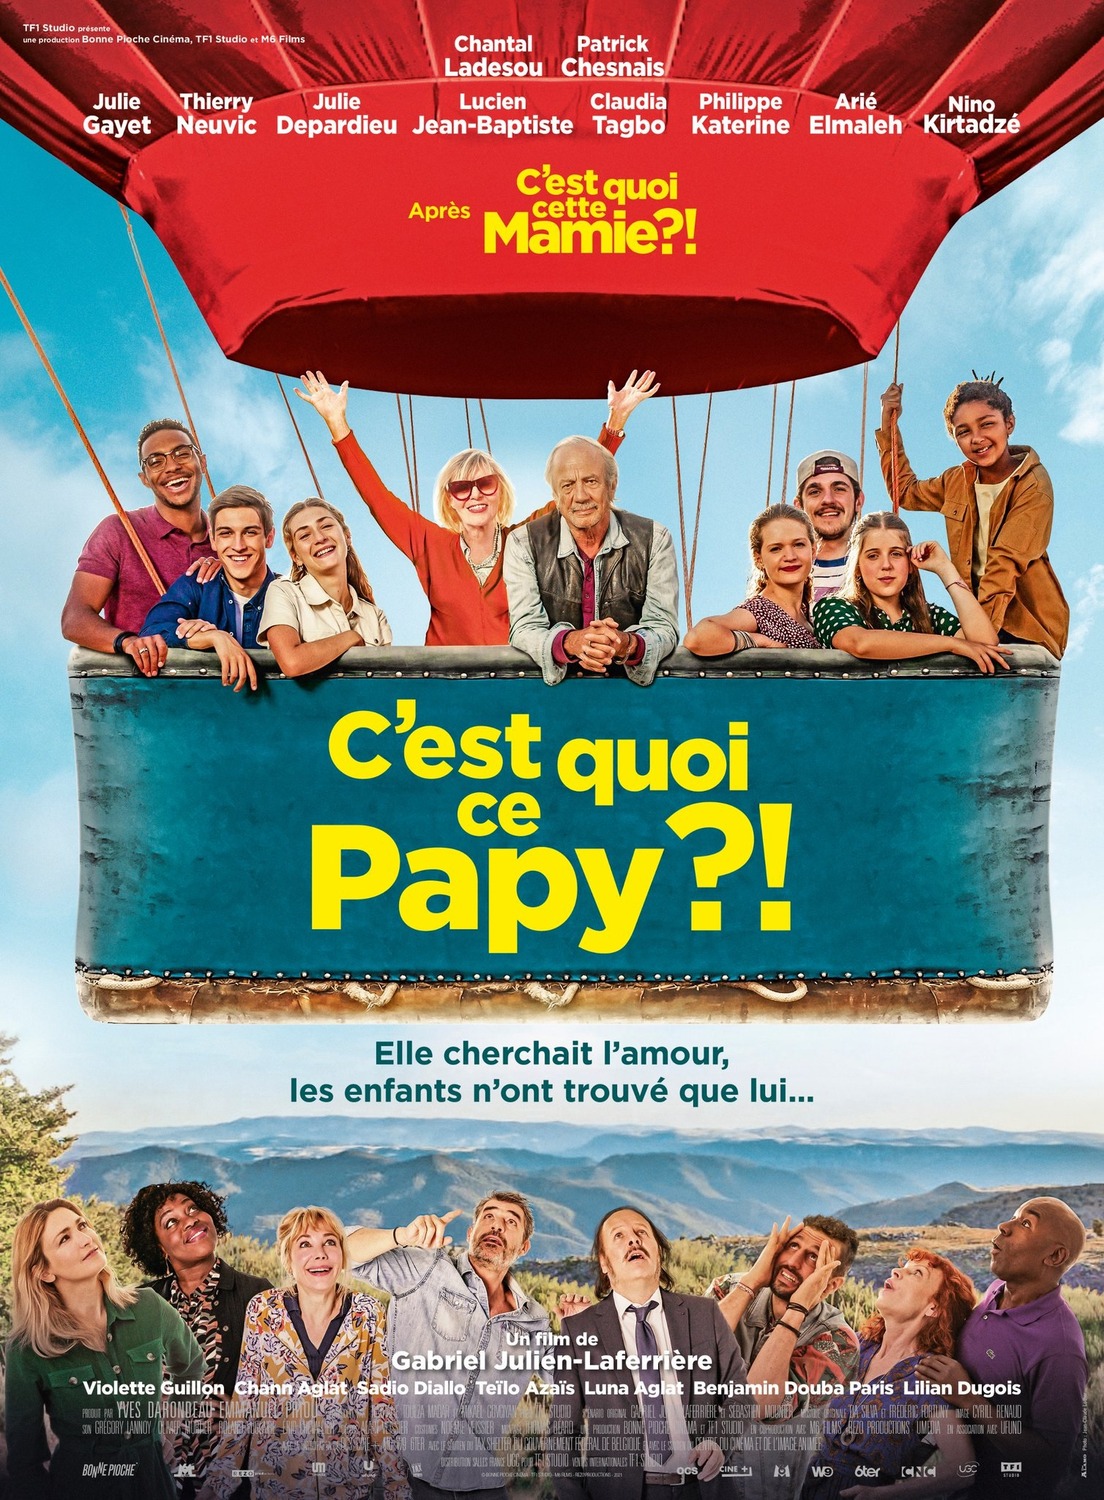 Extra Large Movie Poster Image for C'est quoi ce papy?! 